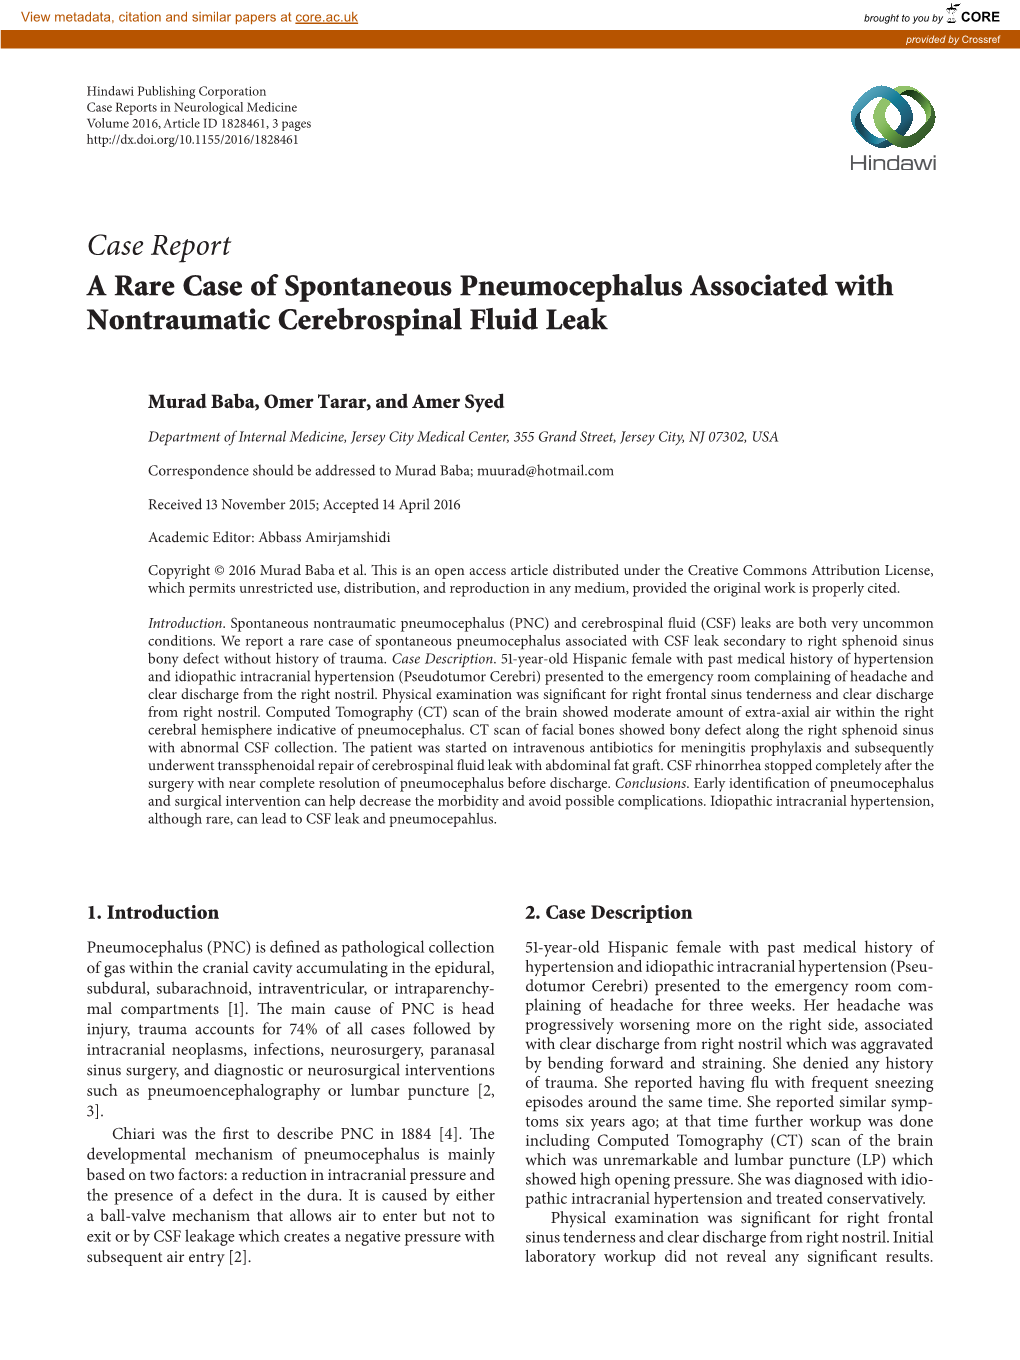 Case Report a Rare Case of Spontaneous Pneumocephalus Associated with Nontraumatic Cerebrospinal Fluid Leak